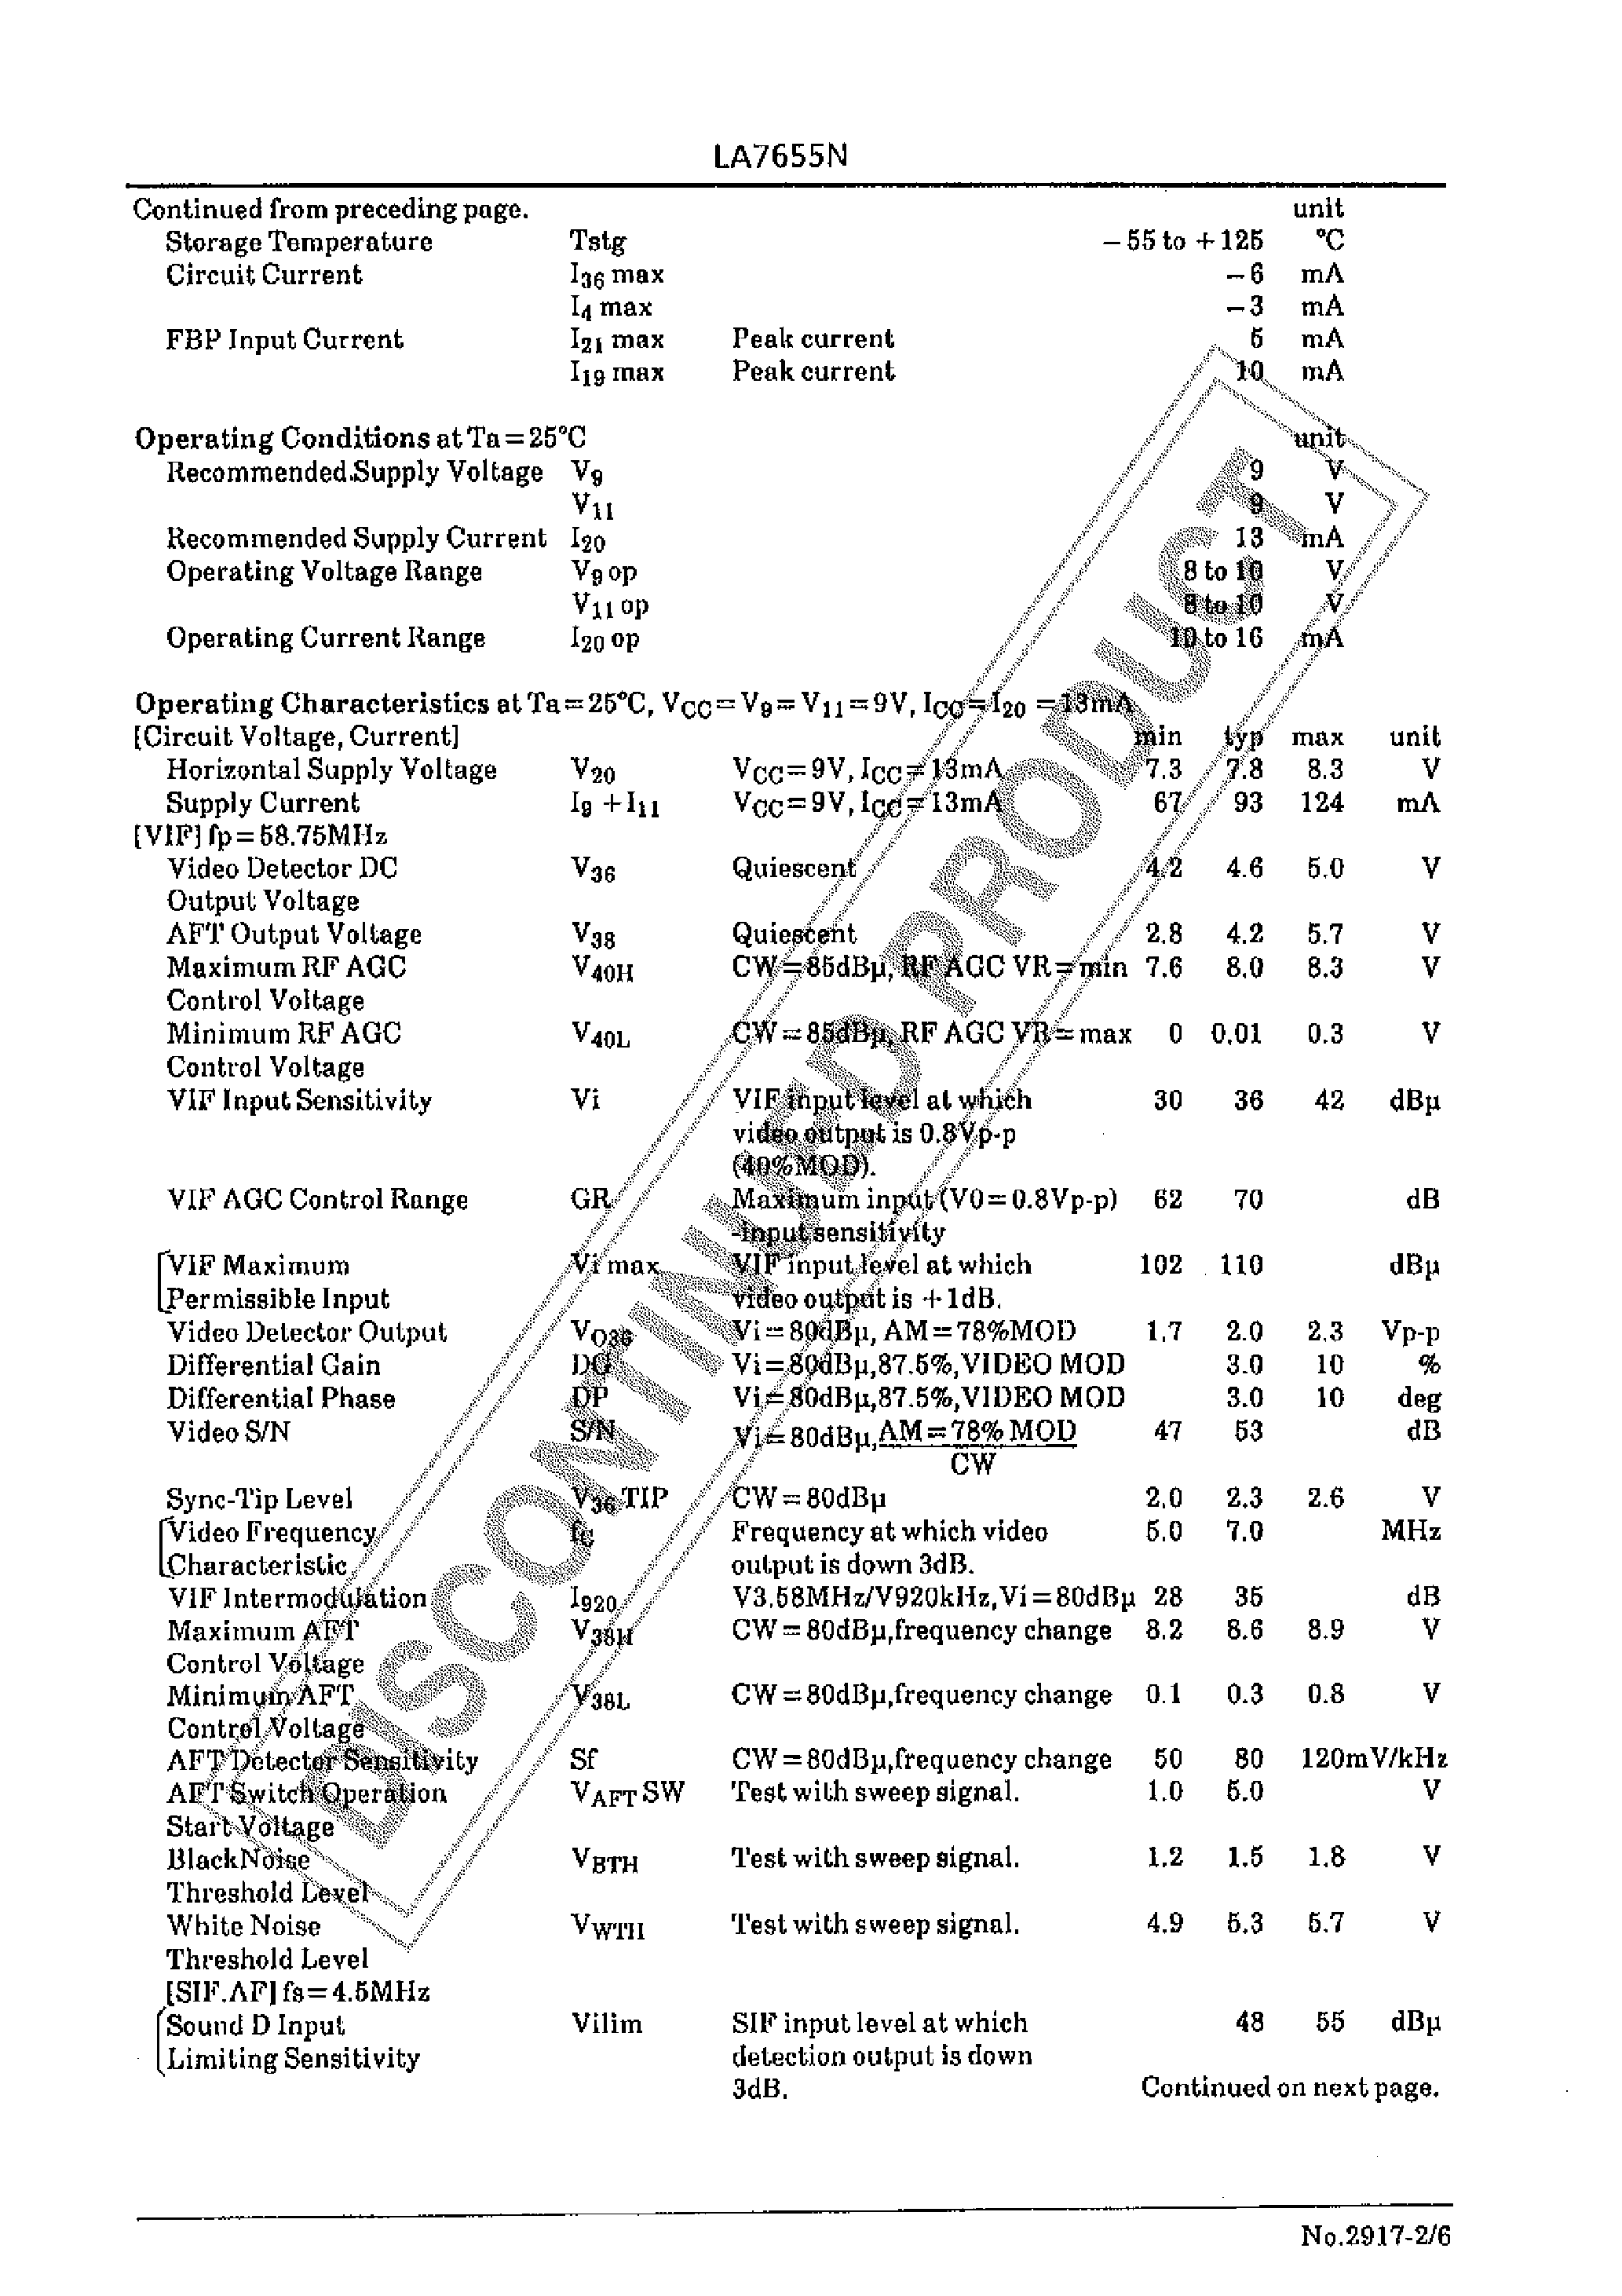 Datasheet LA7655N - 1-Chip IC for Color TV Signal Processing page 2